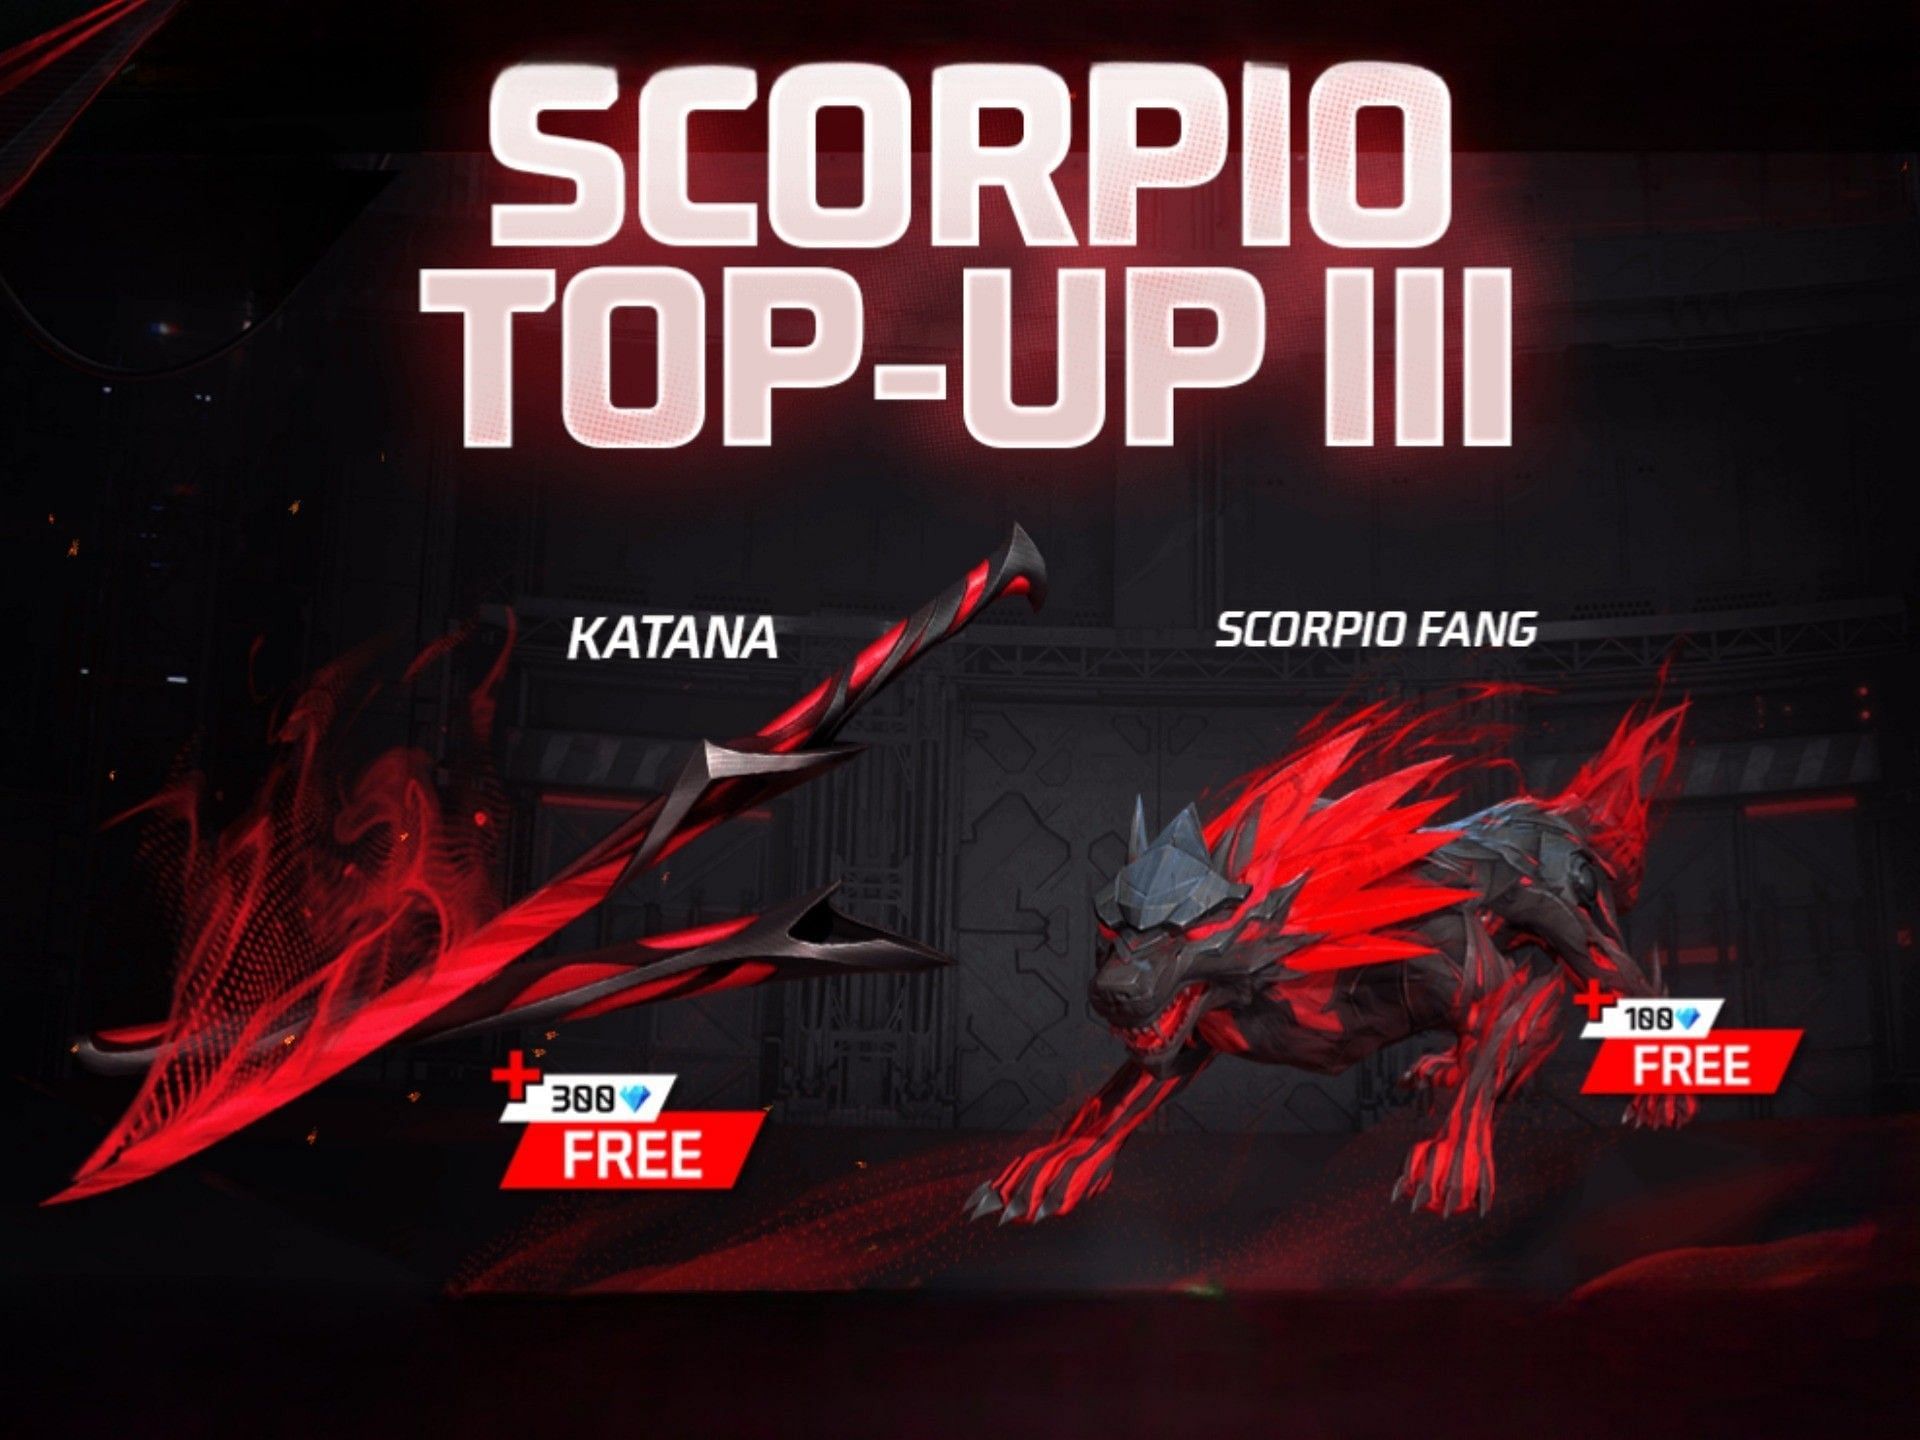 New Scorpio Top-Up 3 event has started in Free Fire MAX (Image via Sportskeeda)